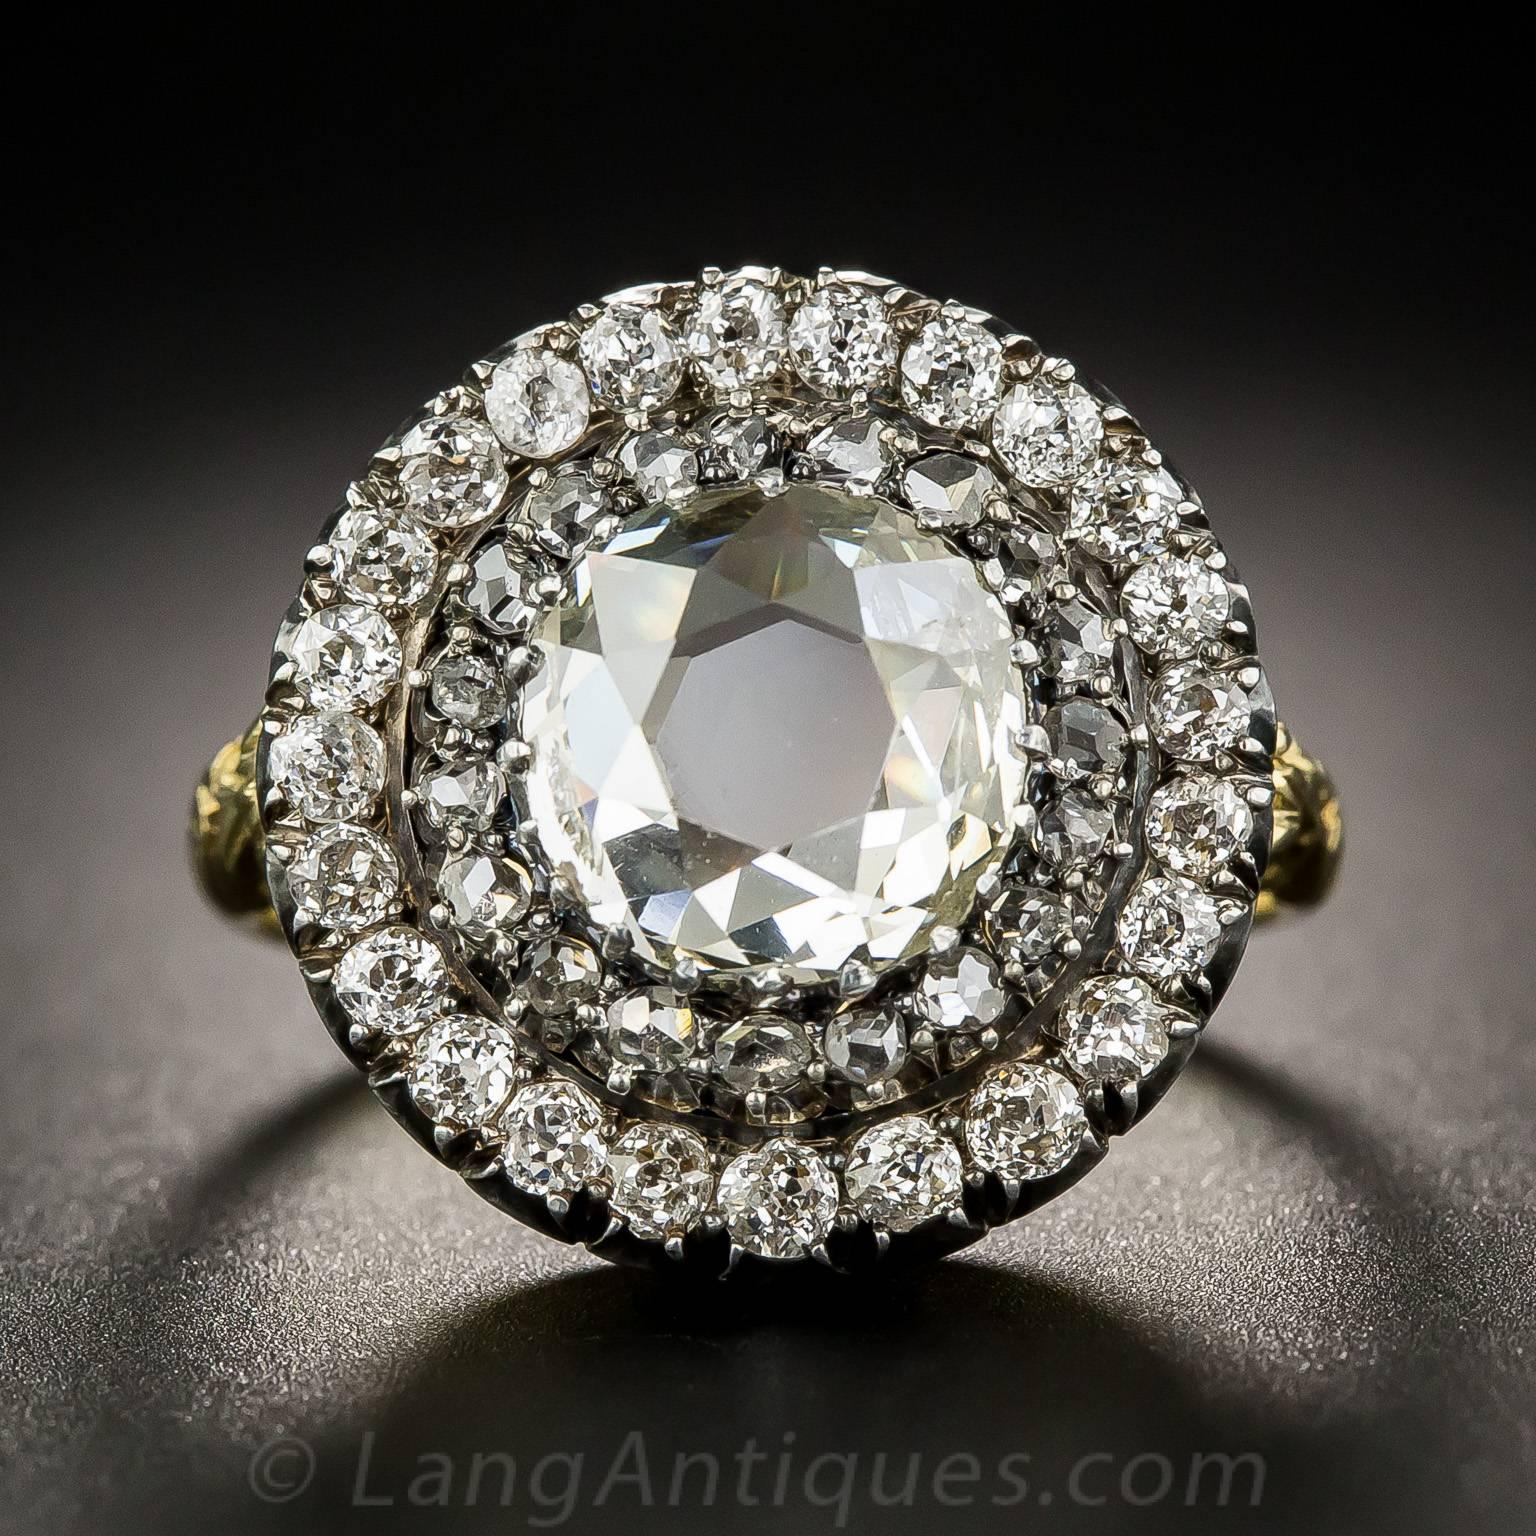 Halfway between a rose-cut and old mine-cut diamond best describes the unique cut of the center diamond in this fabulous and impressive Victorian ultra-sparkler. Although measuring 1.50 carats, the circumference of the stone is equivalent to a